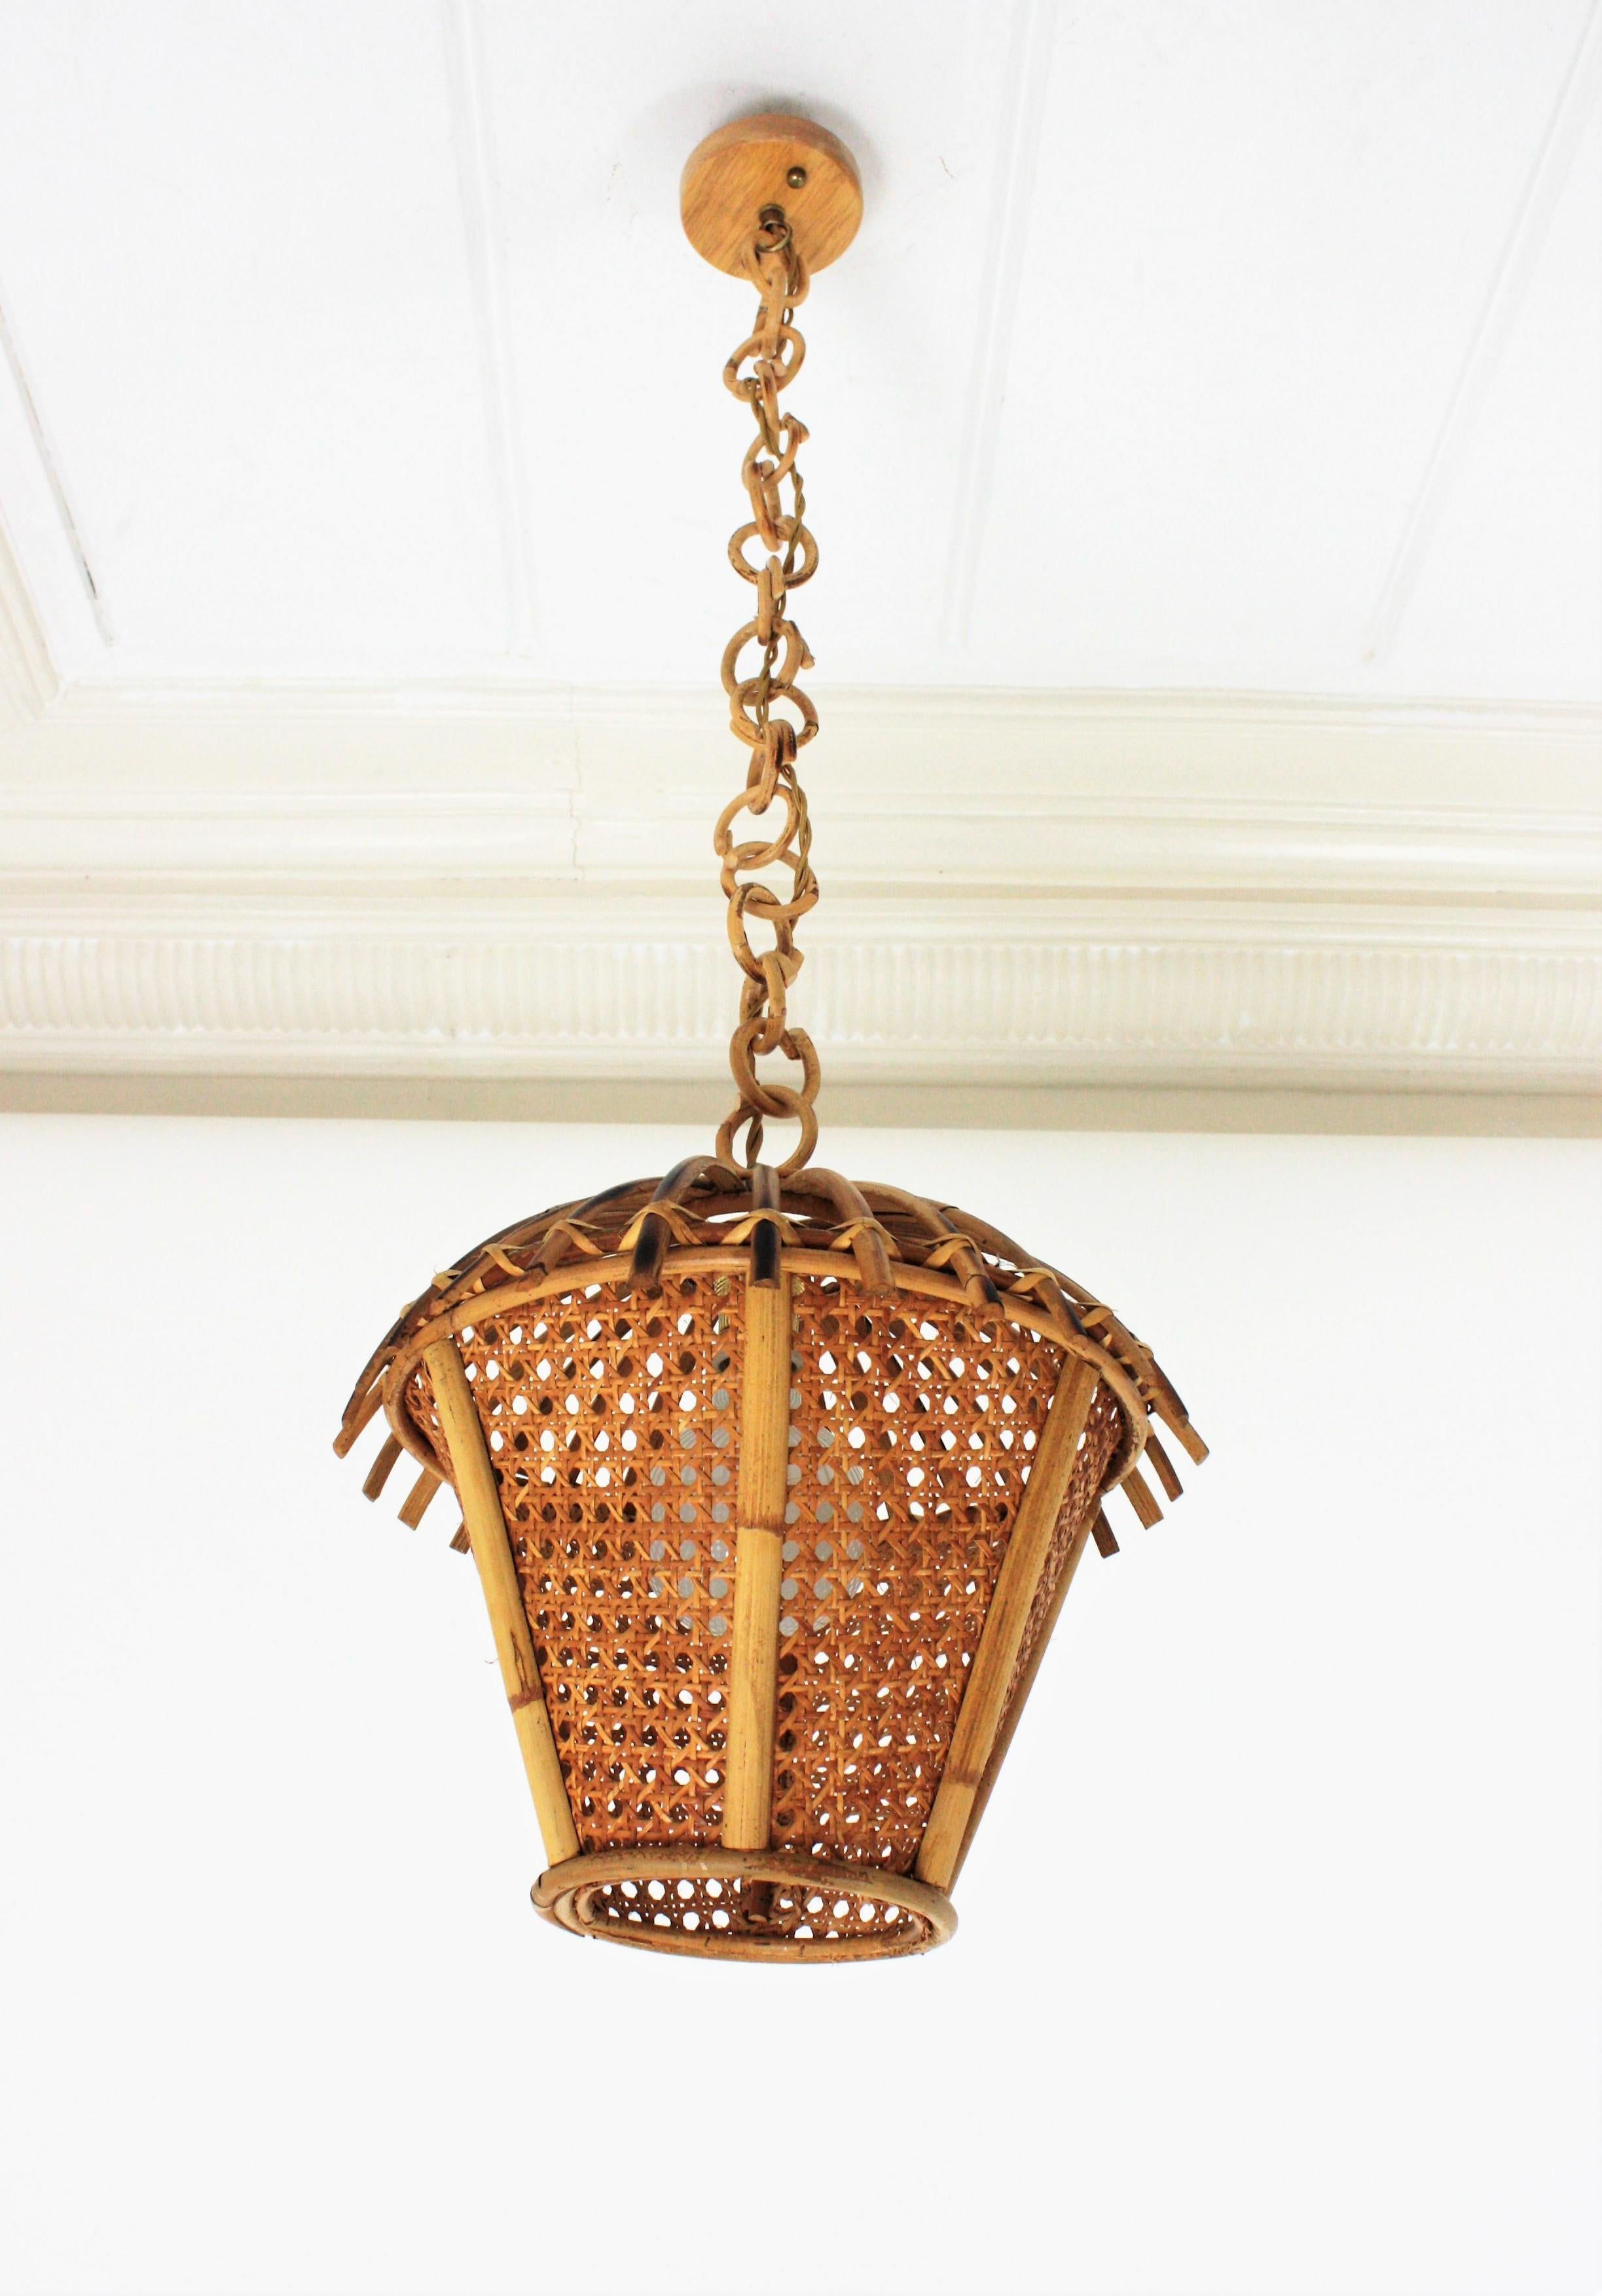 Italian Modernist Rattan and Wicker Wire Pagoda Pendant Hanging Light, 1960s For Sale 3